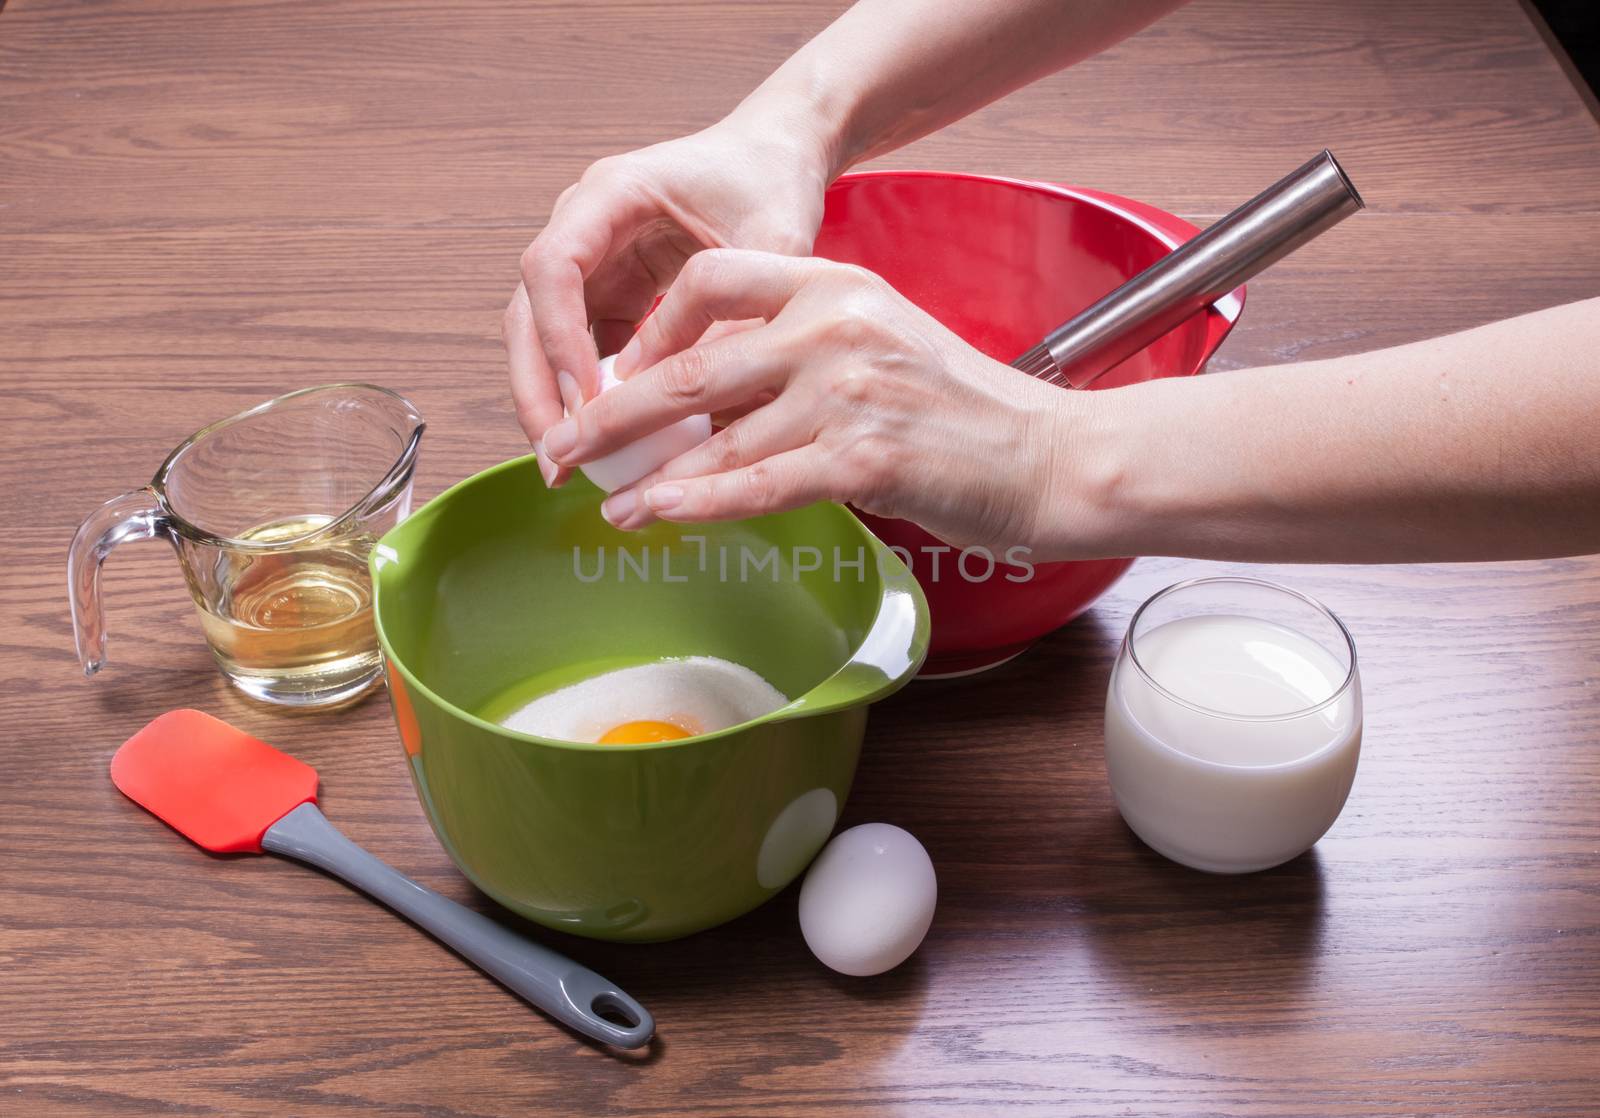 Woman breaking eggs in a bowl to cook a cake by lanalanglois